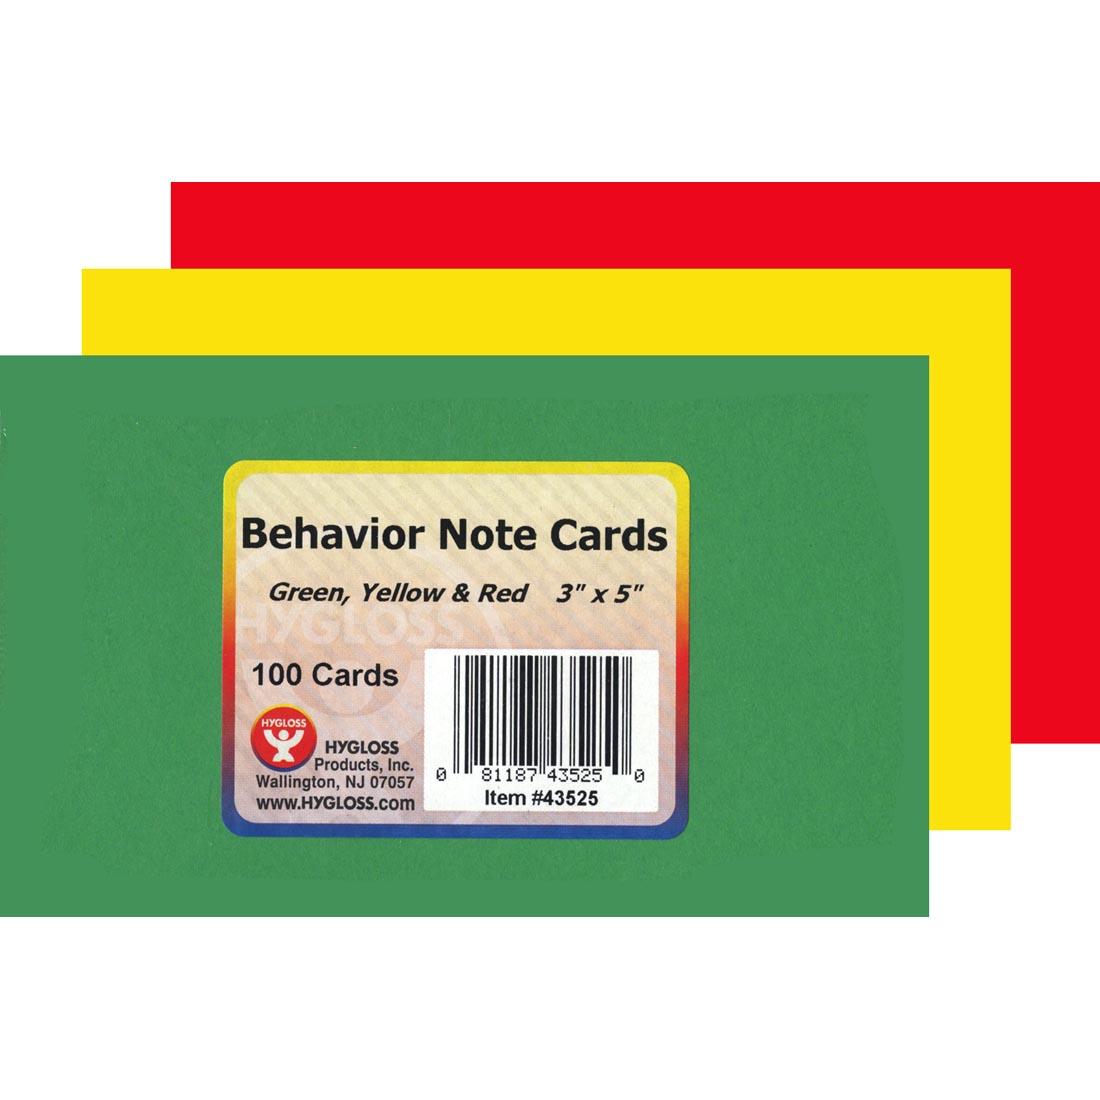 Behavior Management Note Cards include Green, Yellow and Red